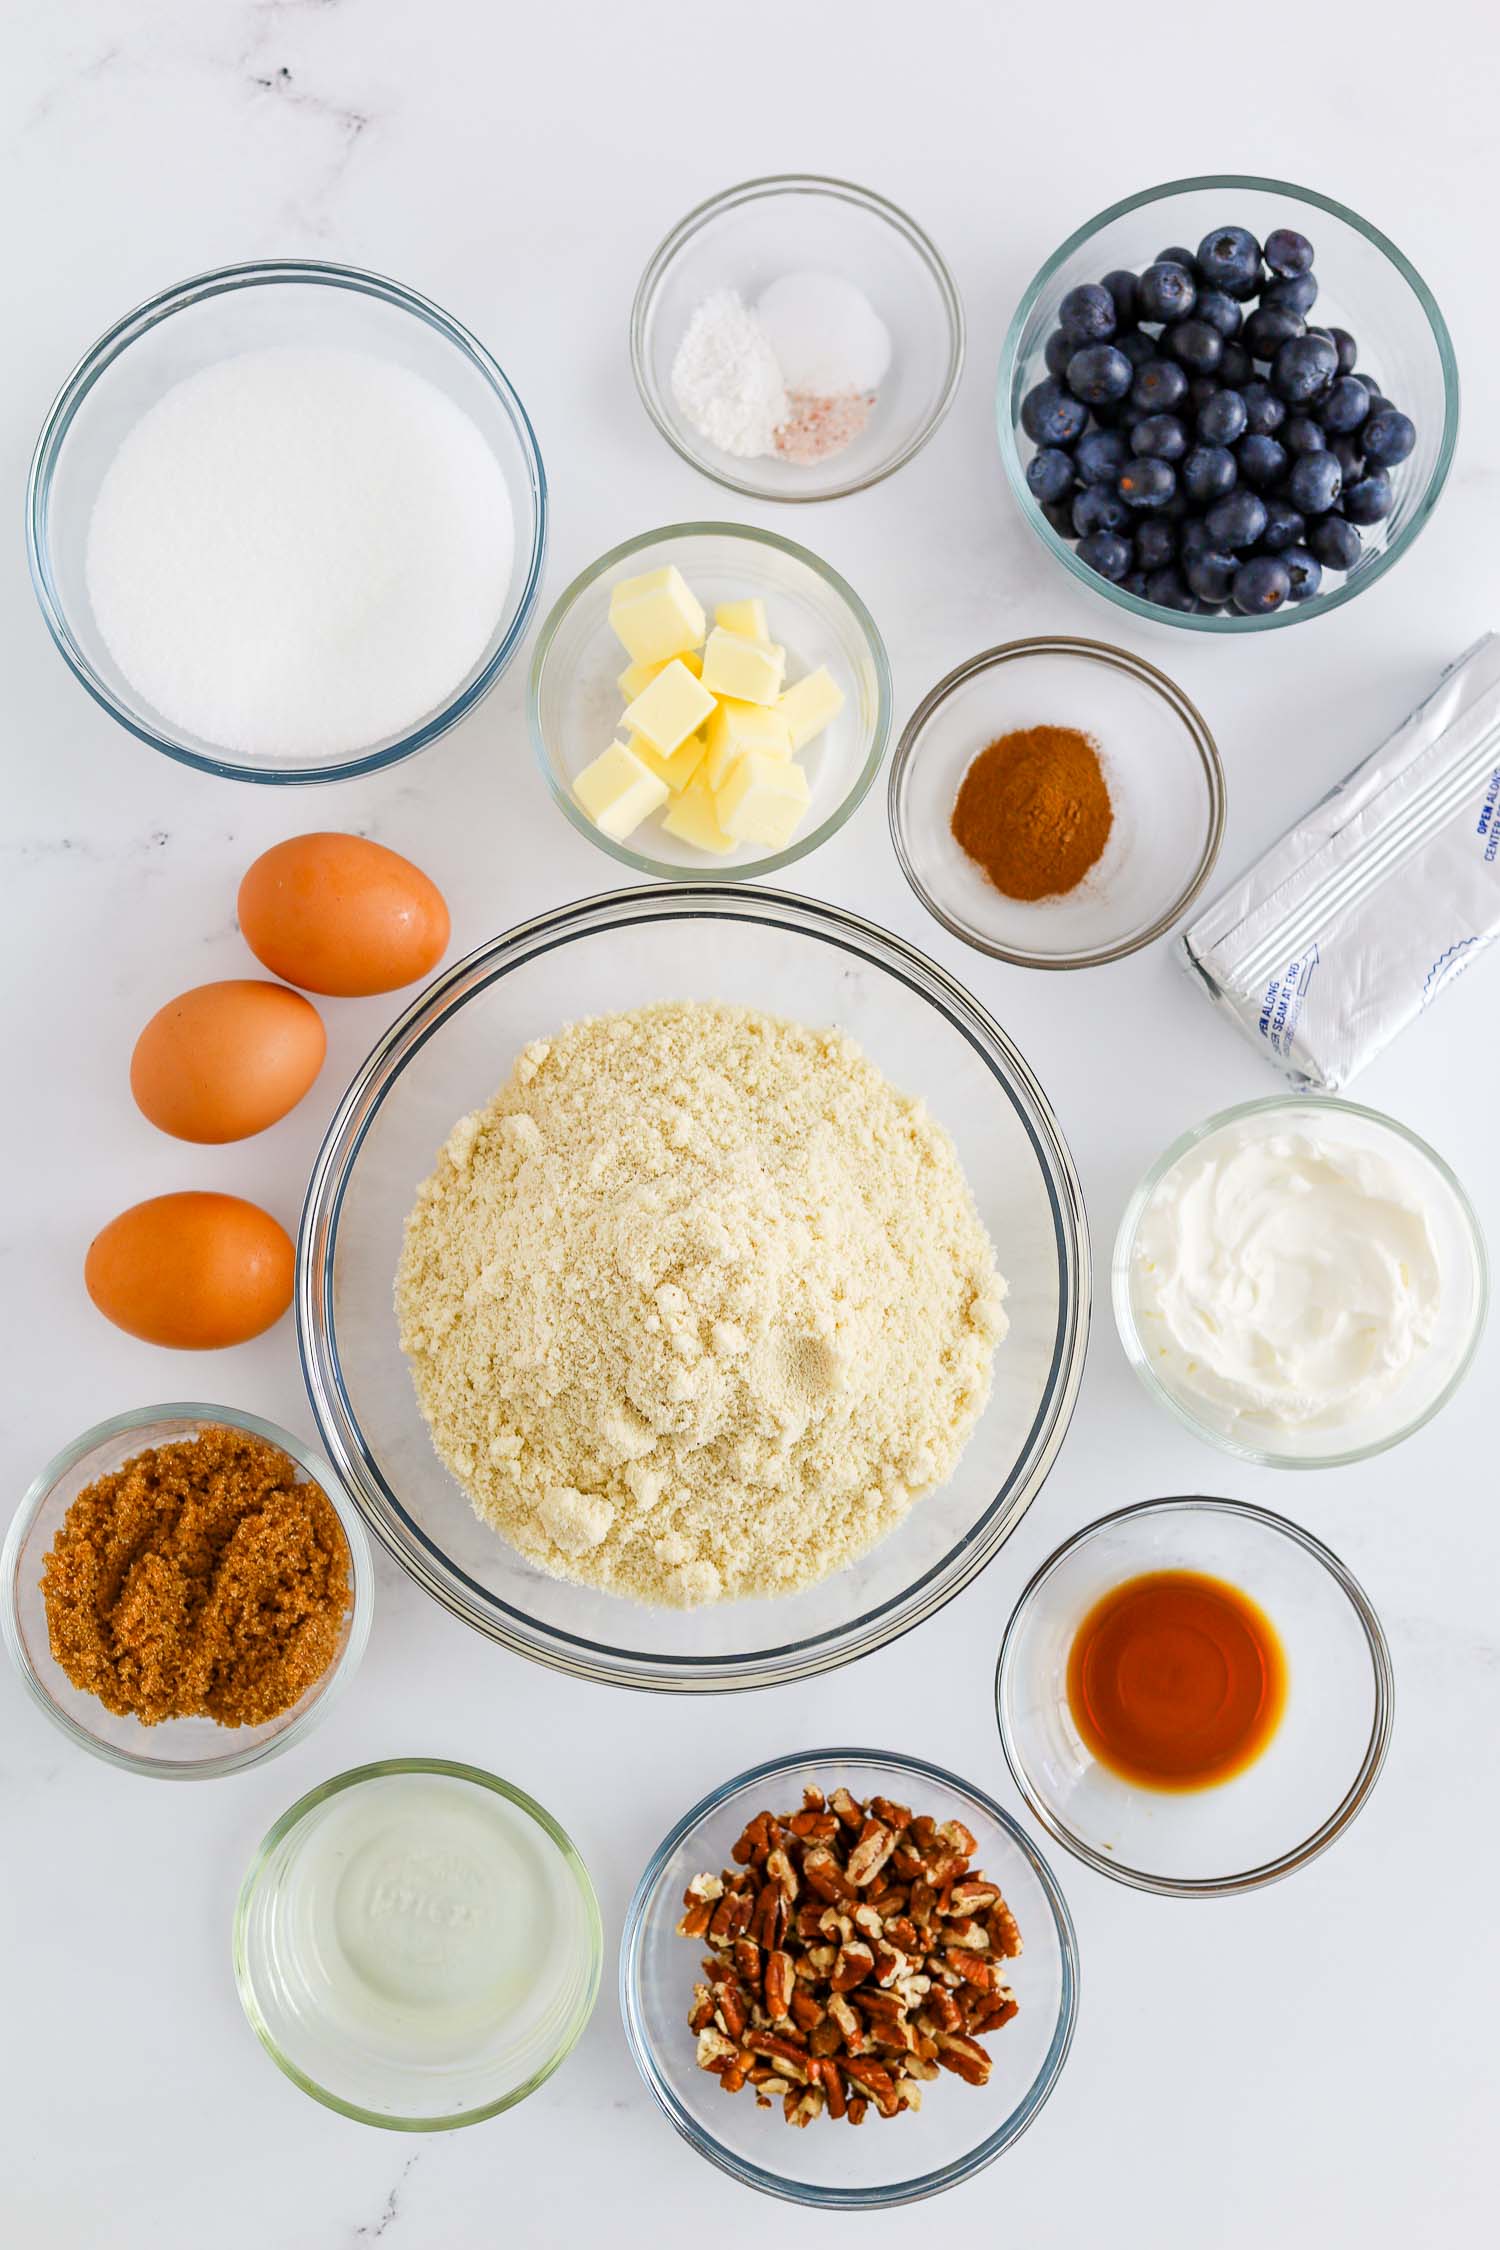 Ingredients needed to make blueberry coffee cake